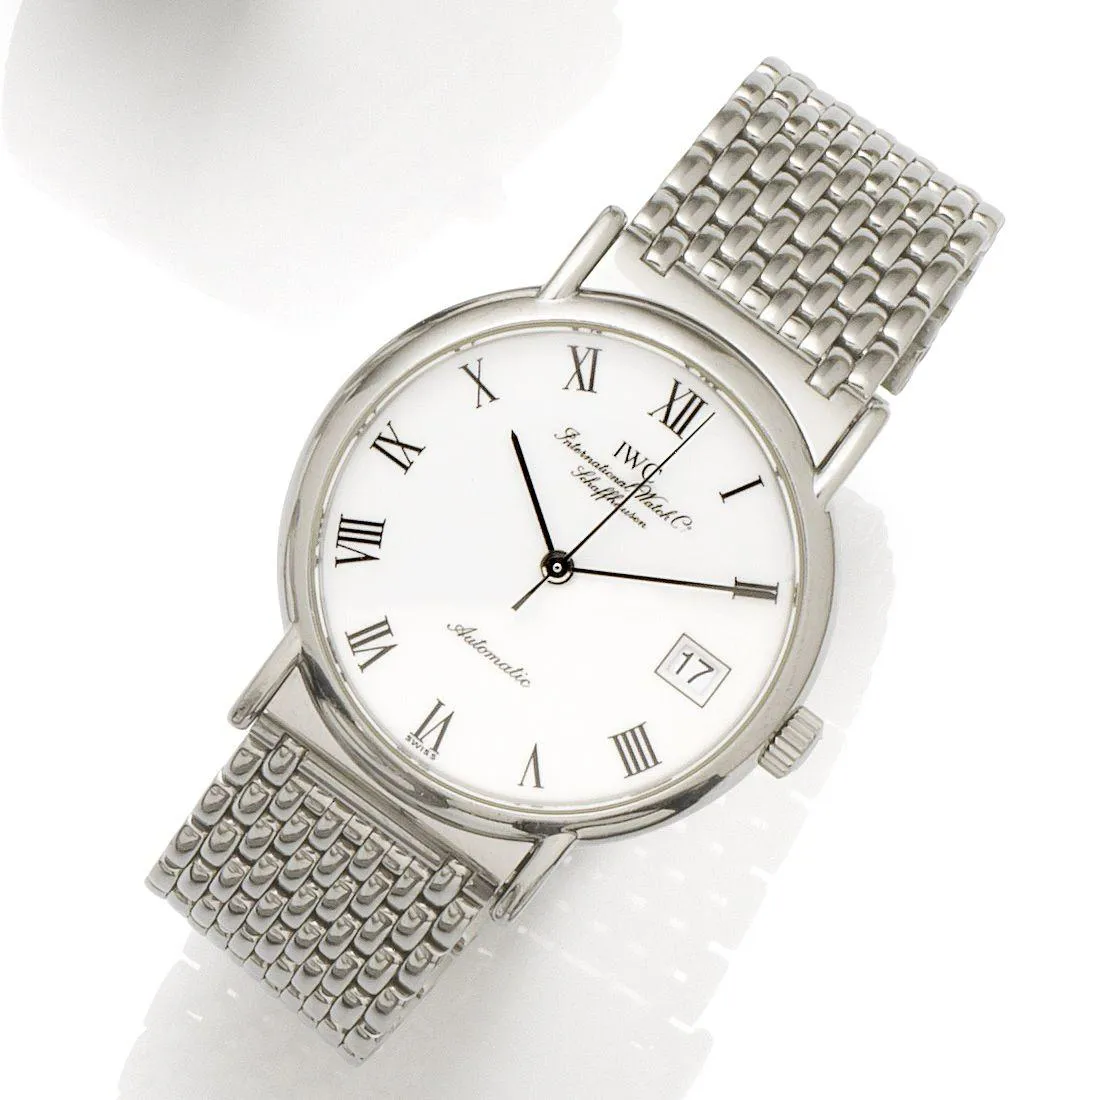 IWC 35131 34mm Stainless steel White